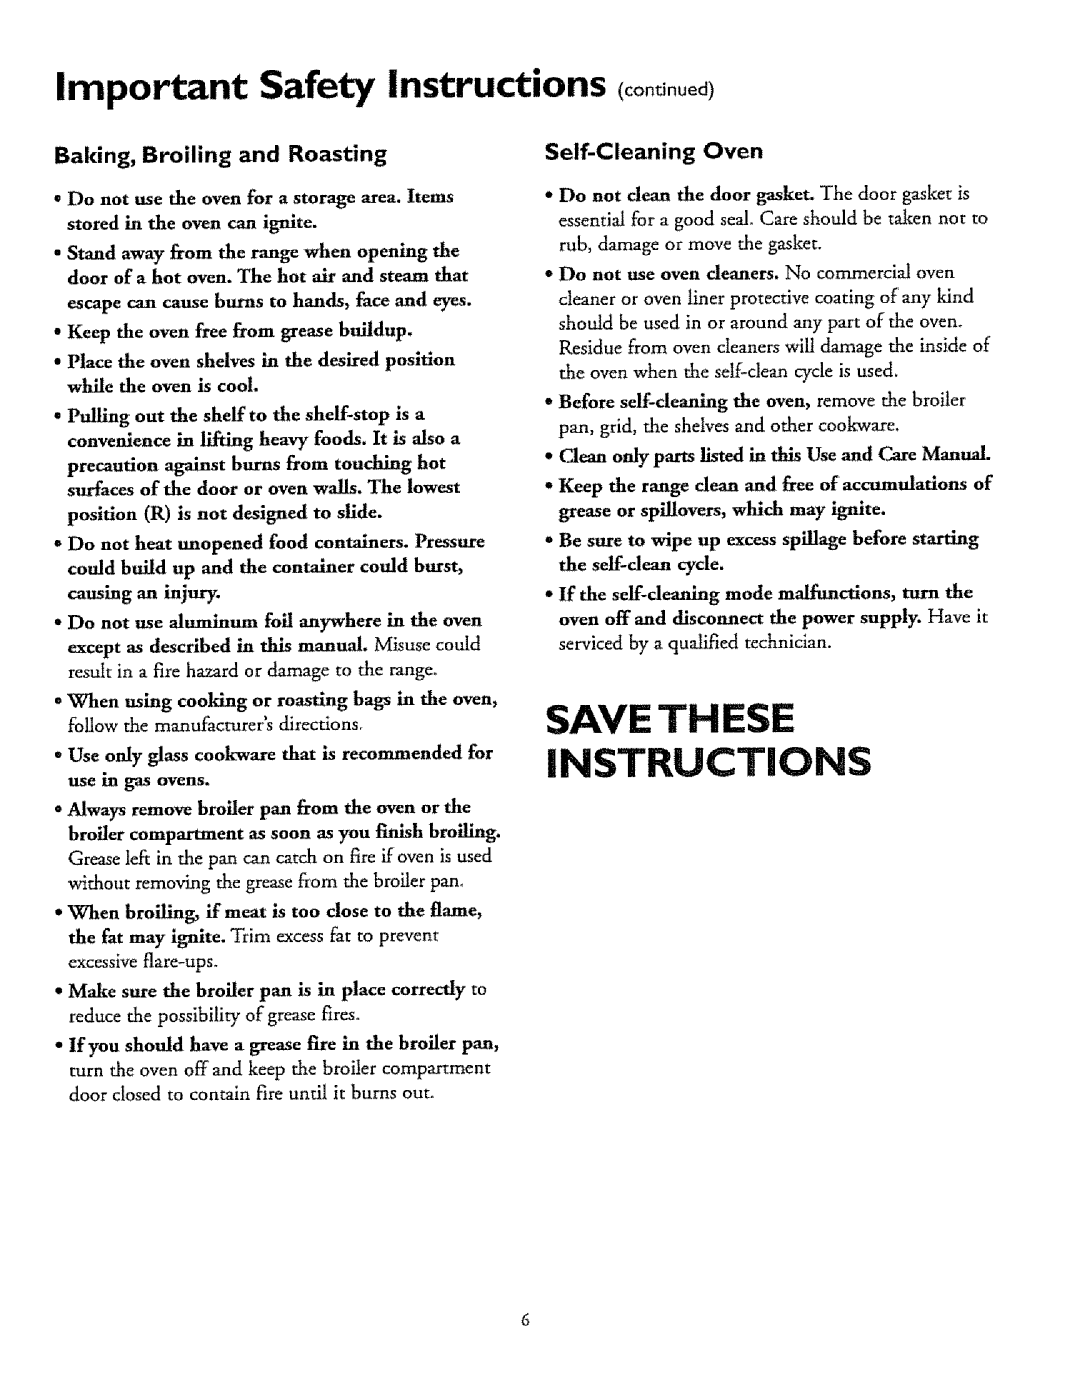 Sears 72676, 72671, 72675 Save These Instructions, Important Safety Instructions continued, Baking, Broiling and Roasting 